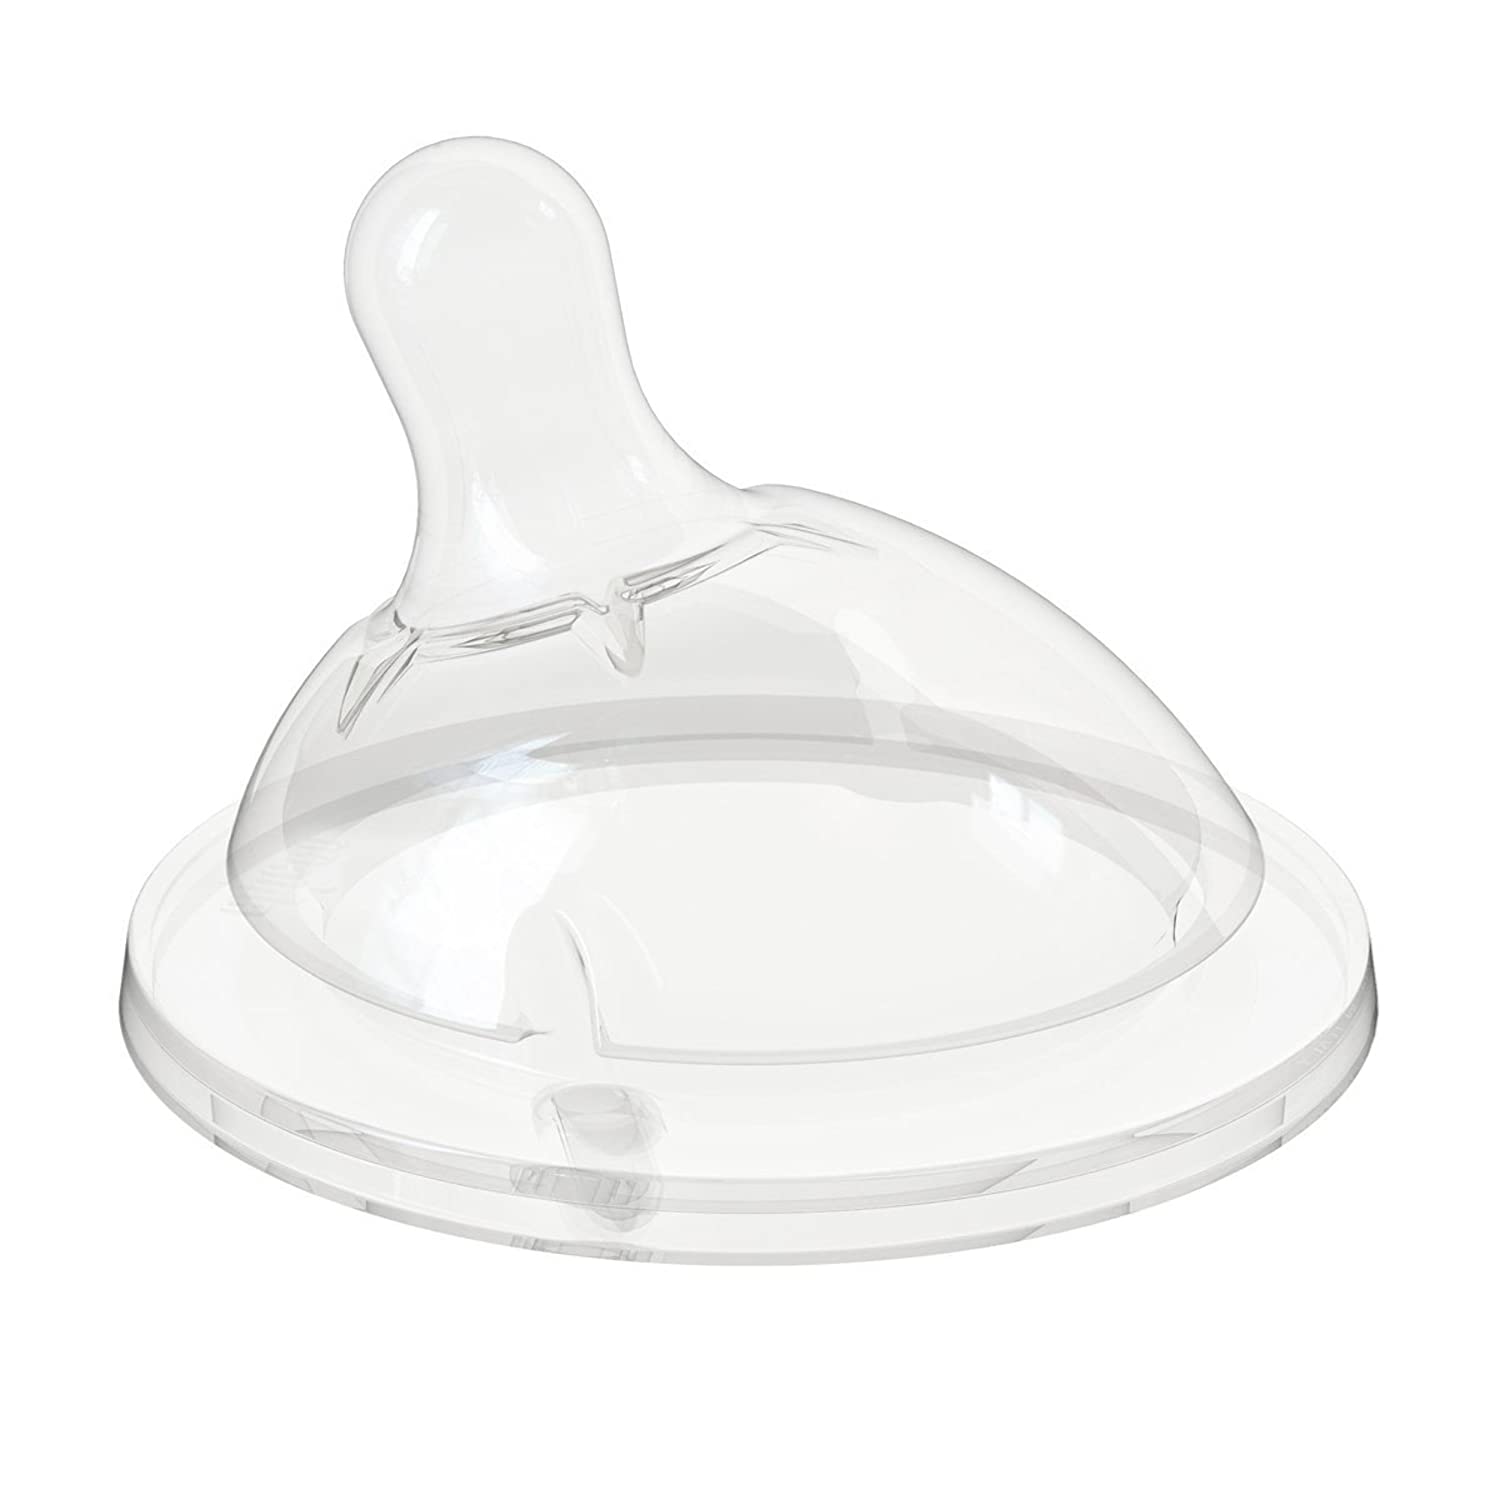 Soft silicone slow flow nipples for babies